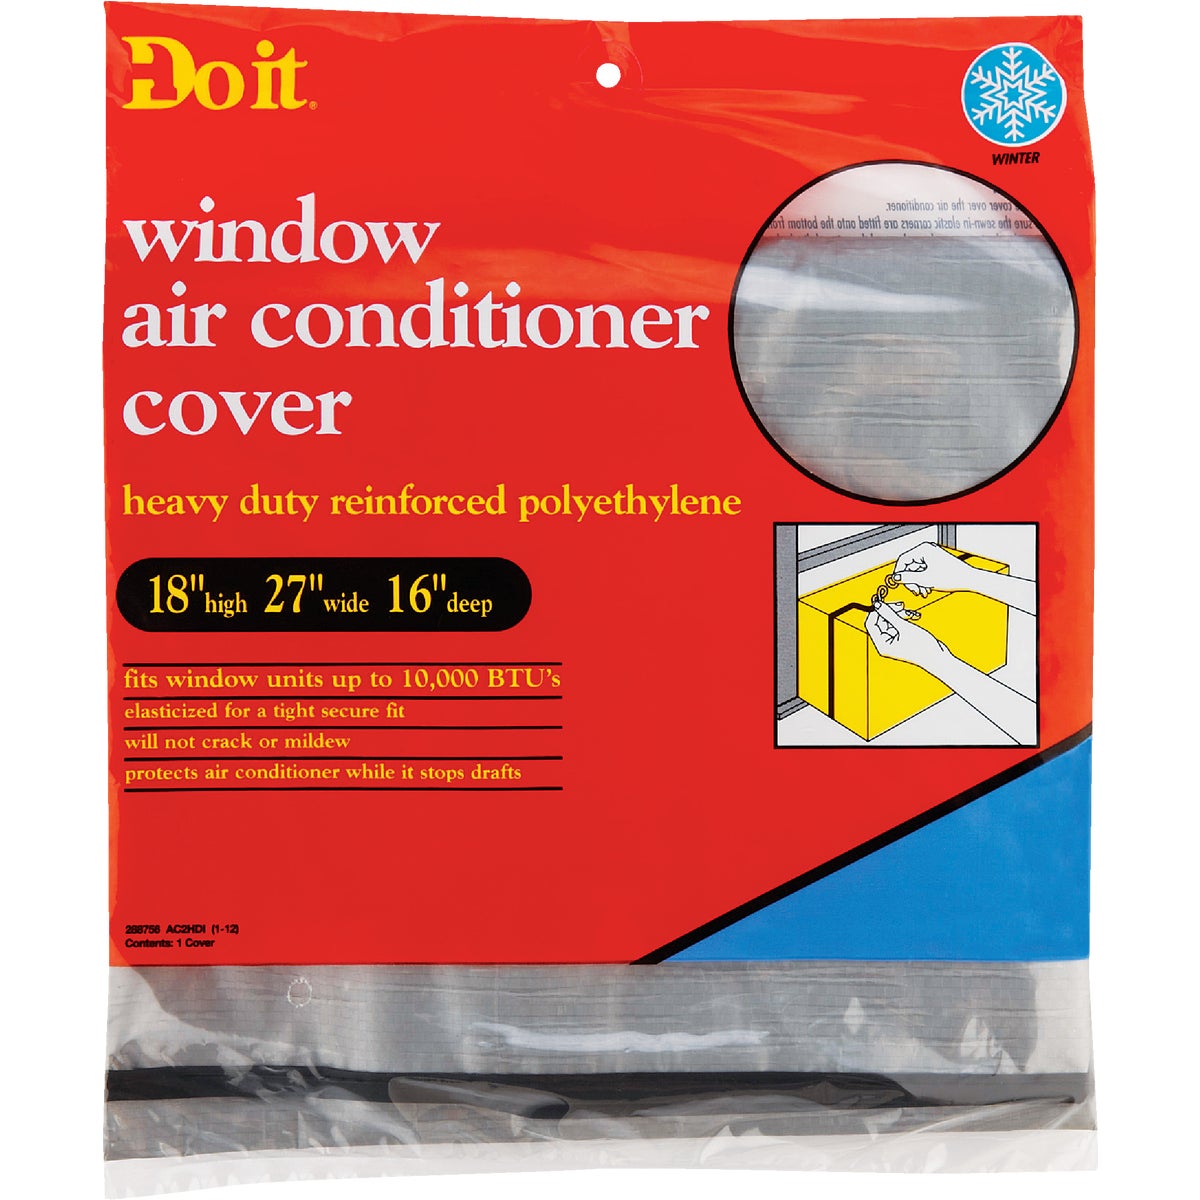 Item 288756, Window air conditioner cover designed to help protect your air conditioning